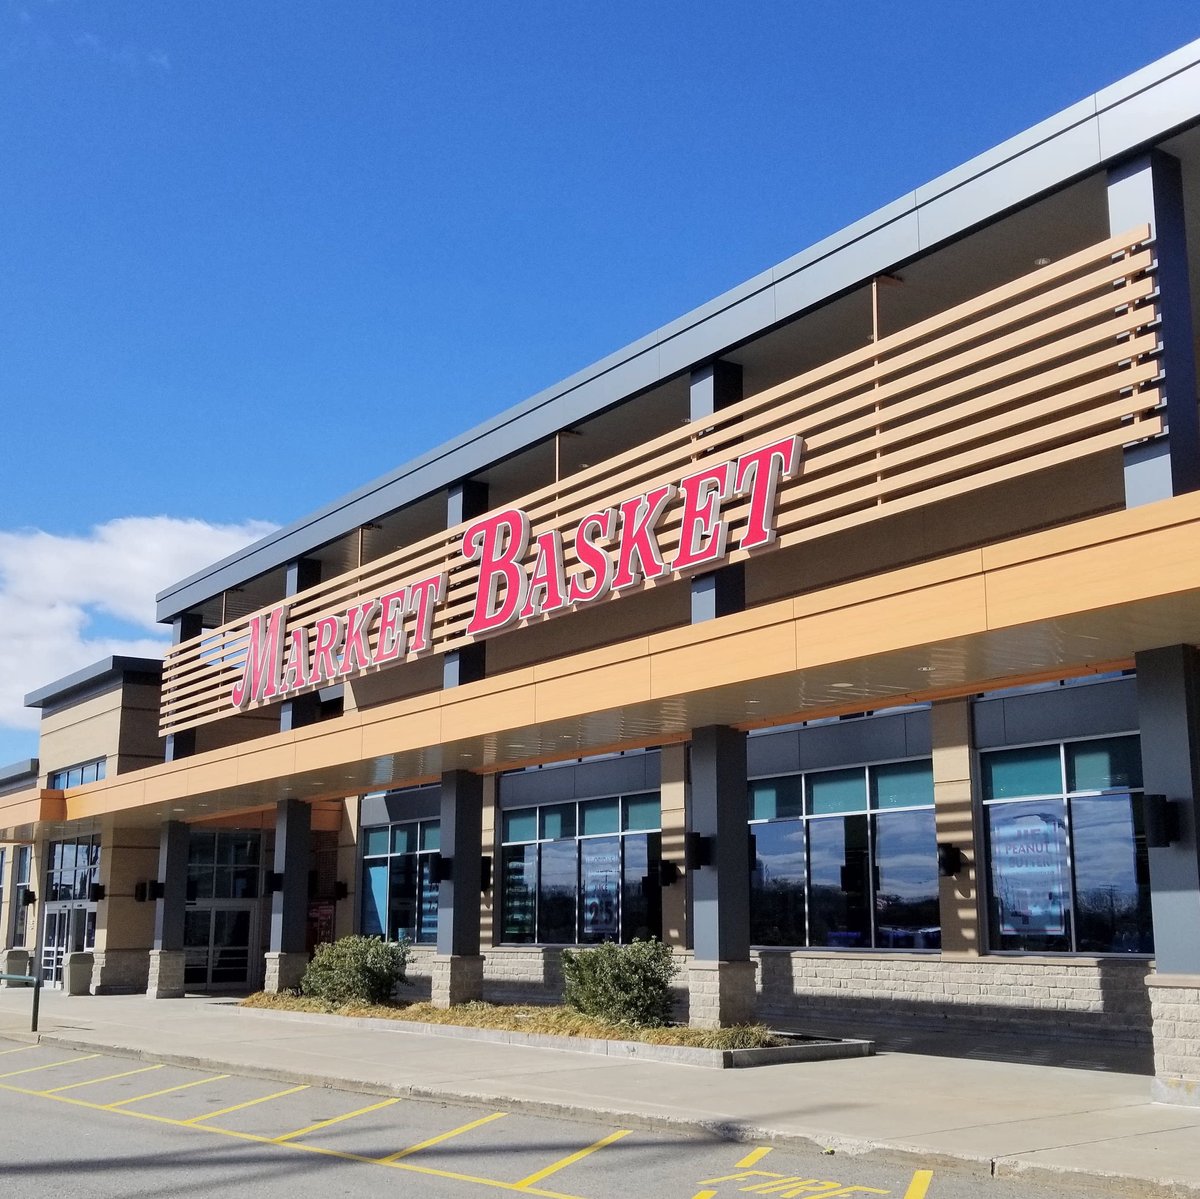 Eat Up New England: INSIDE THE NEW MARKET BASKET IN WALTHAM